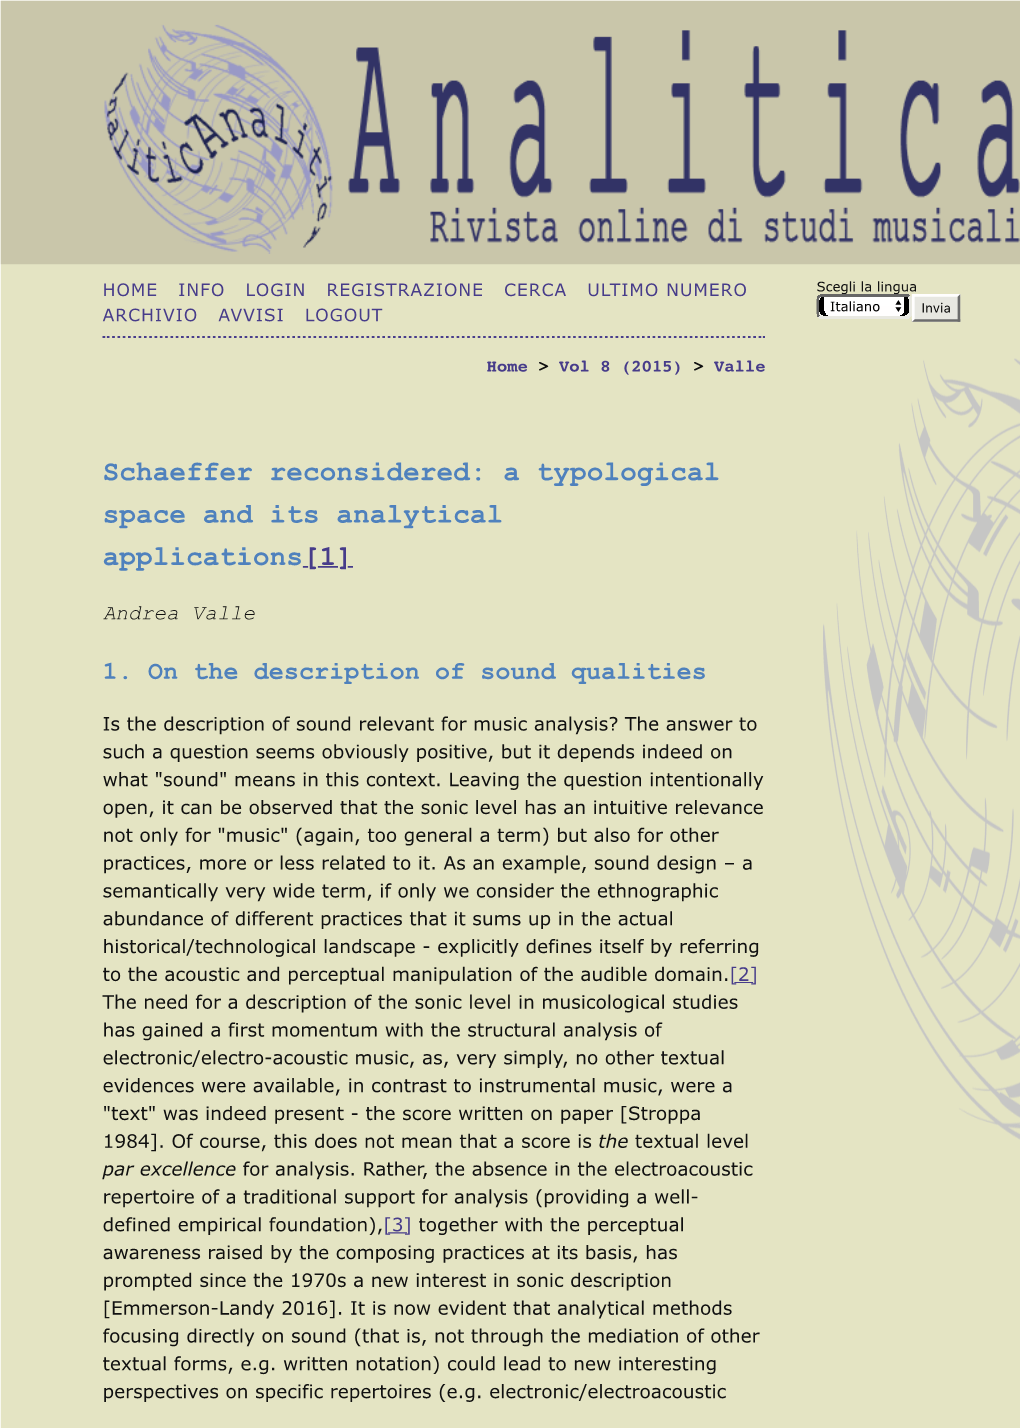 Schaeffer Reconsidered: a Typological Space and Its Analytical Applications[1]